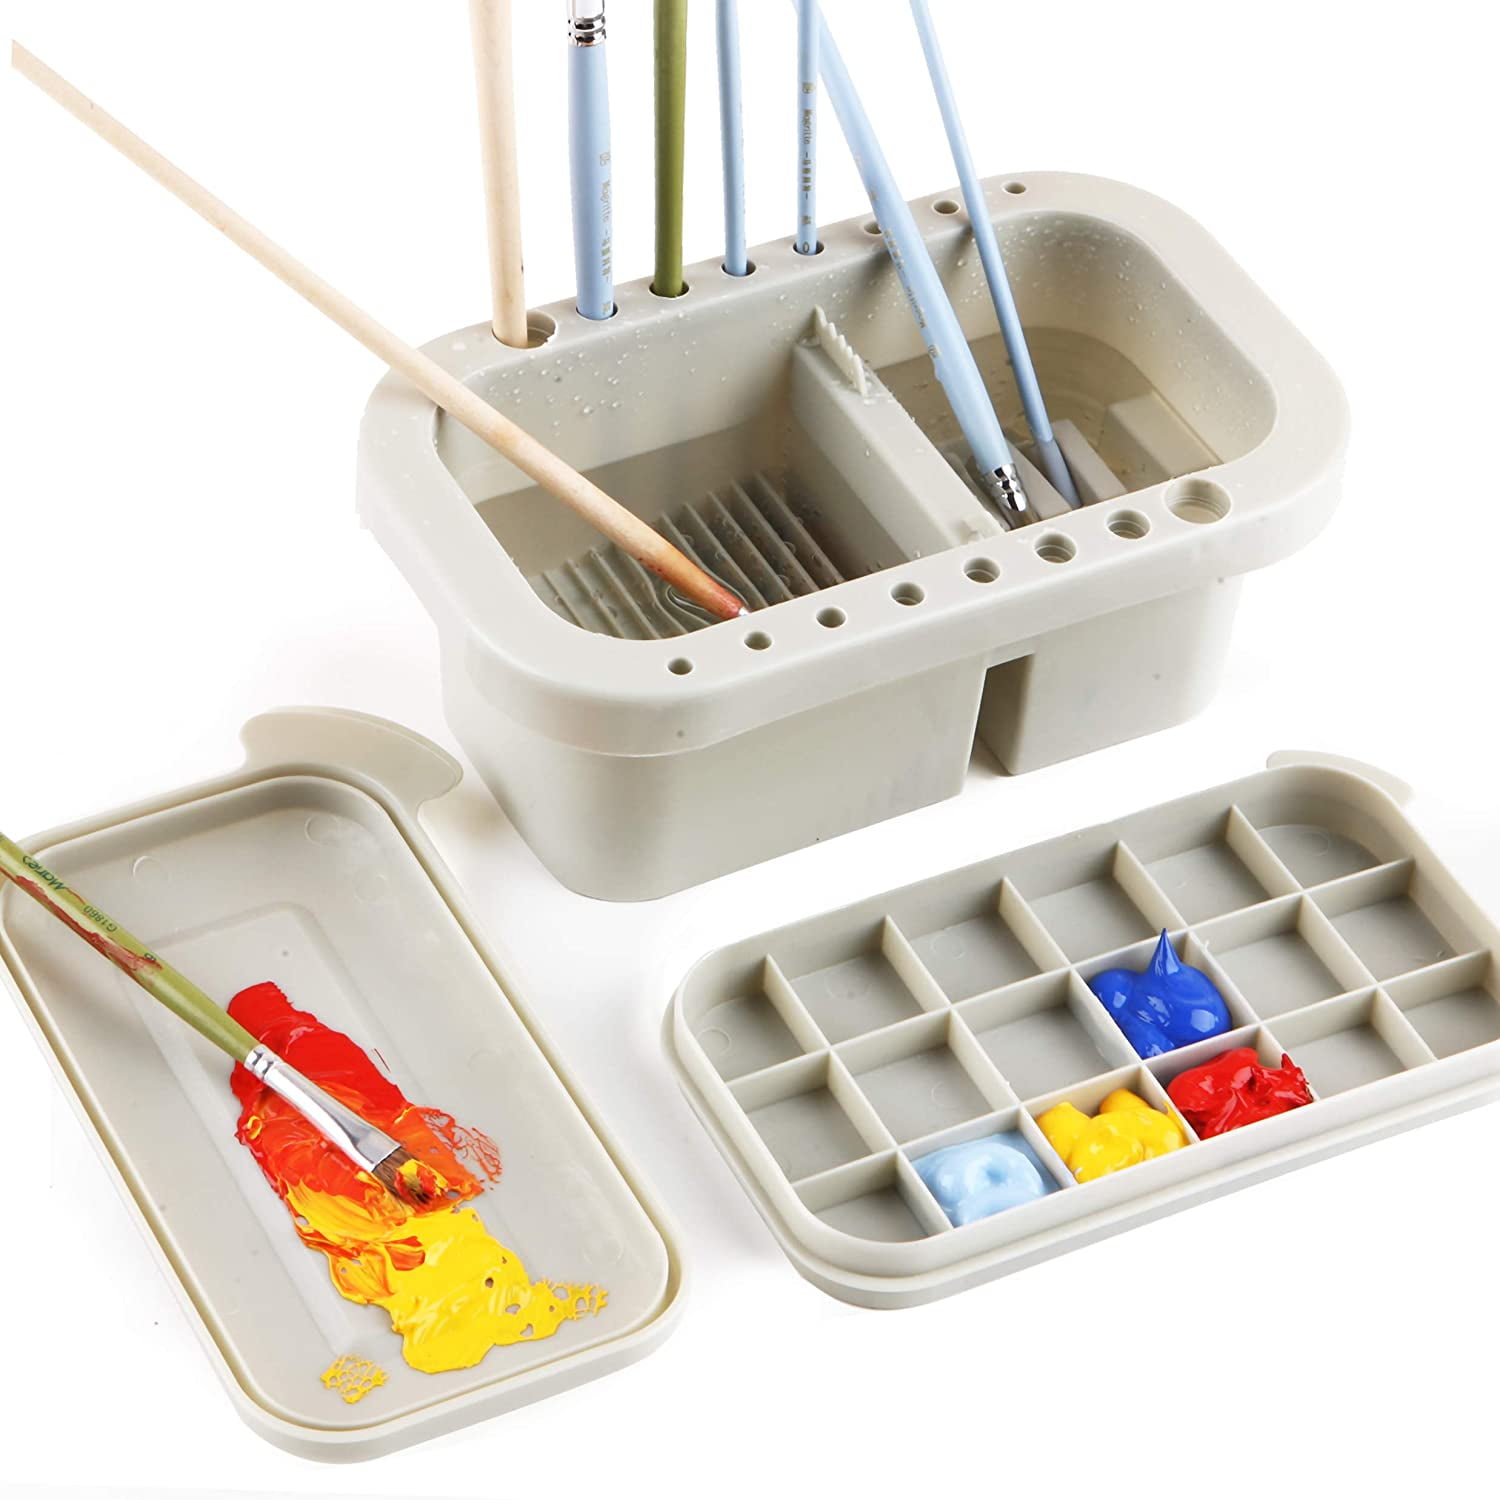 Woehrsh, Paint Brush Cleaner, Paint brush Holder and Storage box, Artist  Multipurpose Paint Tray for acrylic, watercolor and water-based paints